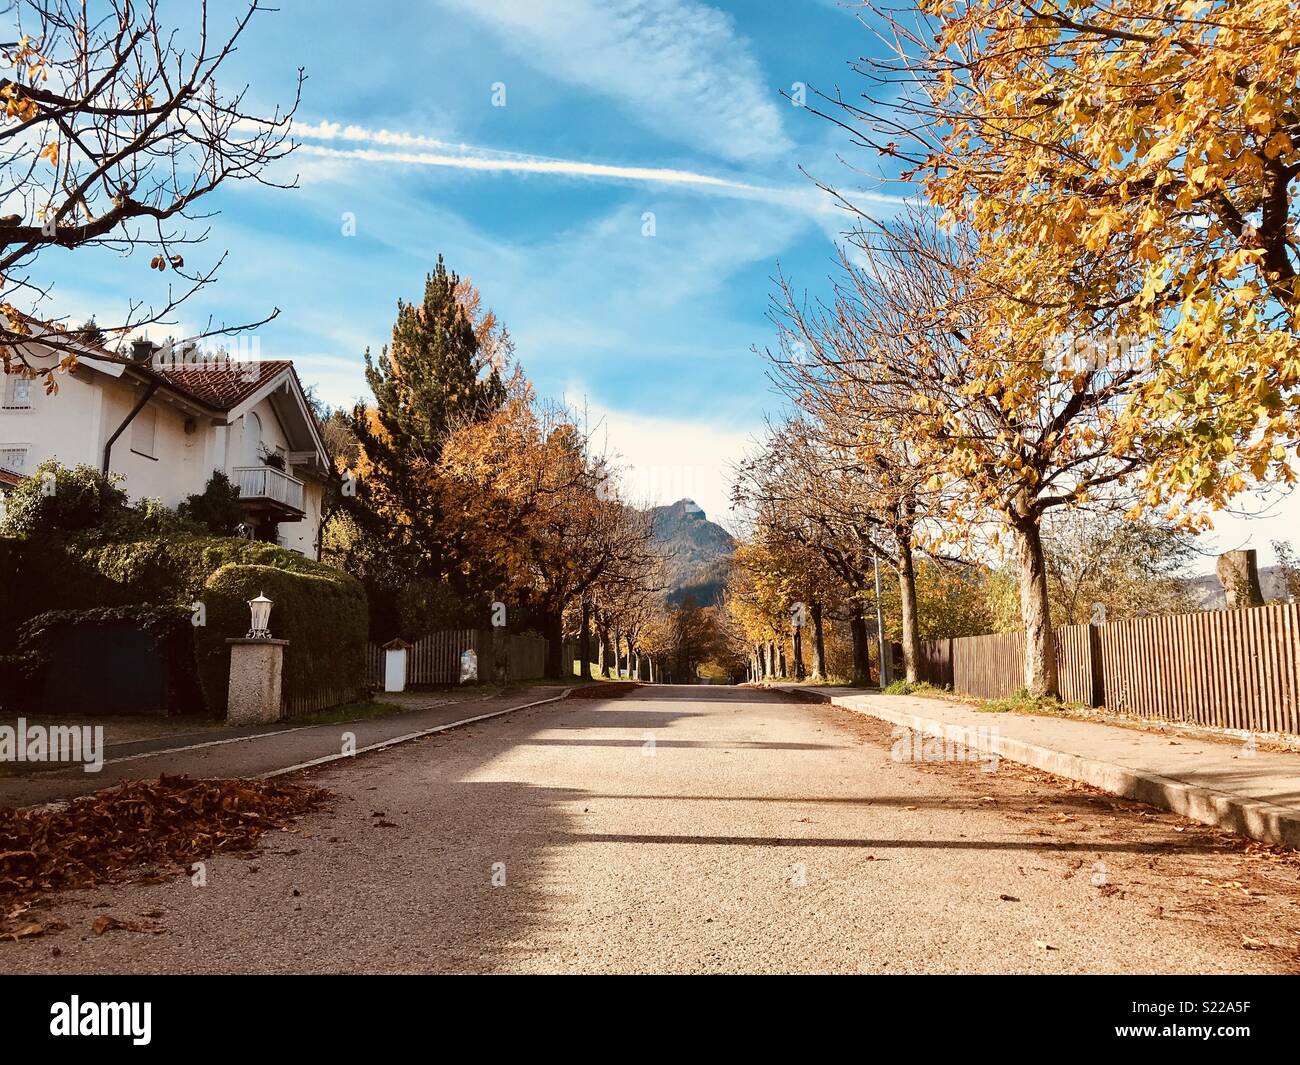 Whilst staying in Germany Last year I couldn’t stop taking photos. I’d never been to Germany and couldn’t believe how photogenic it was. This is looking down the street that our b&b was on. Nov 17 Stock Photo